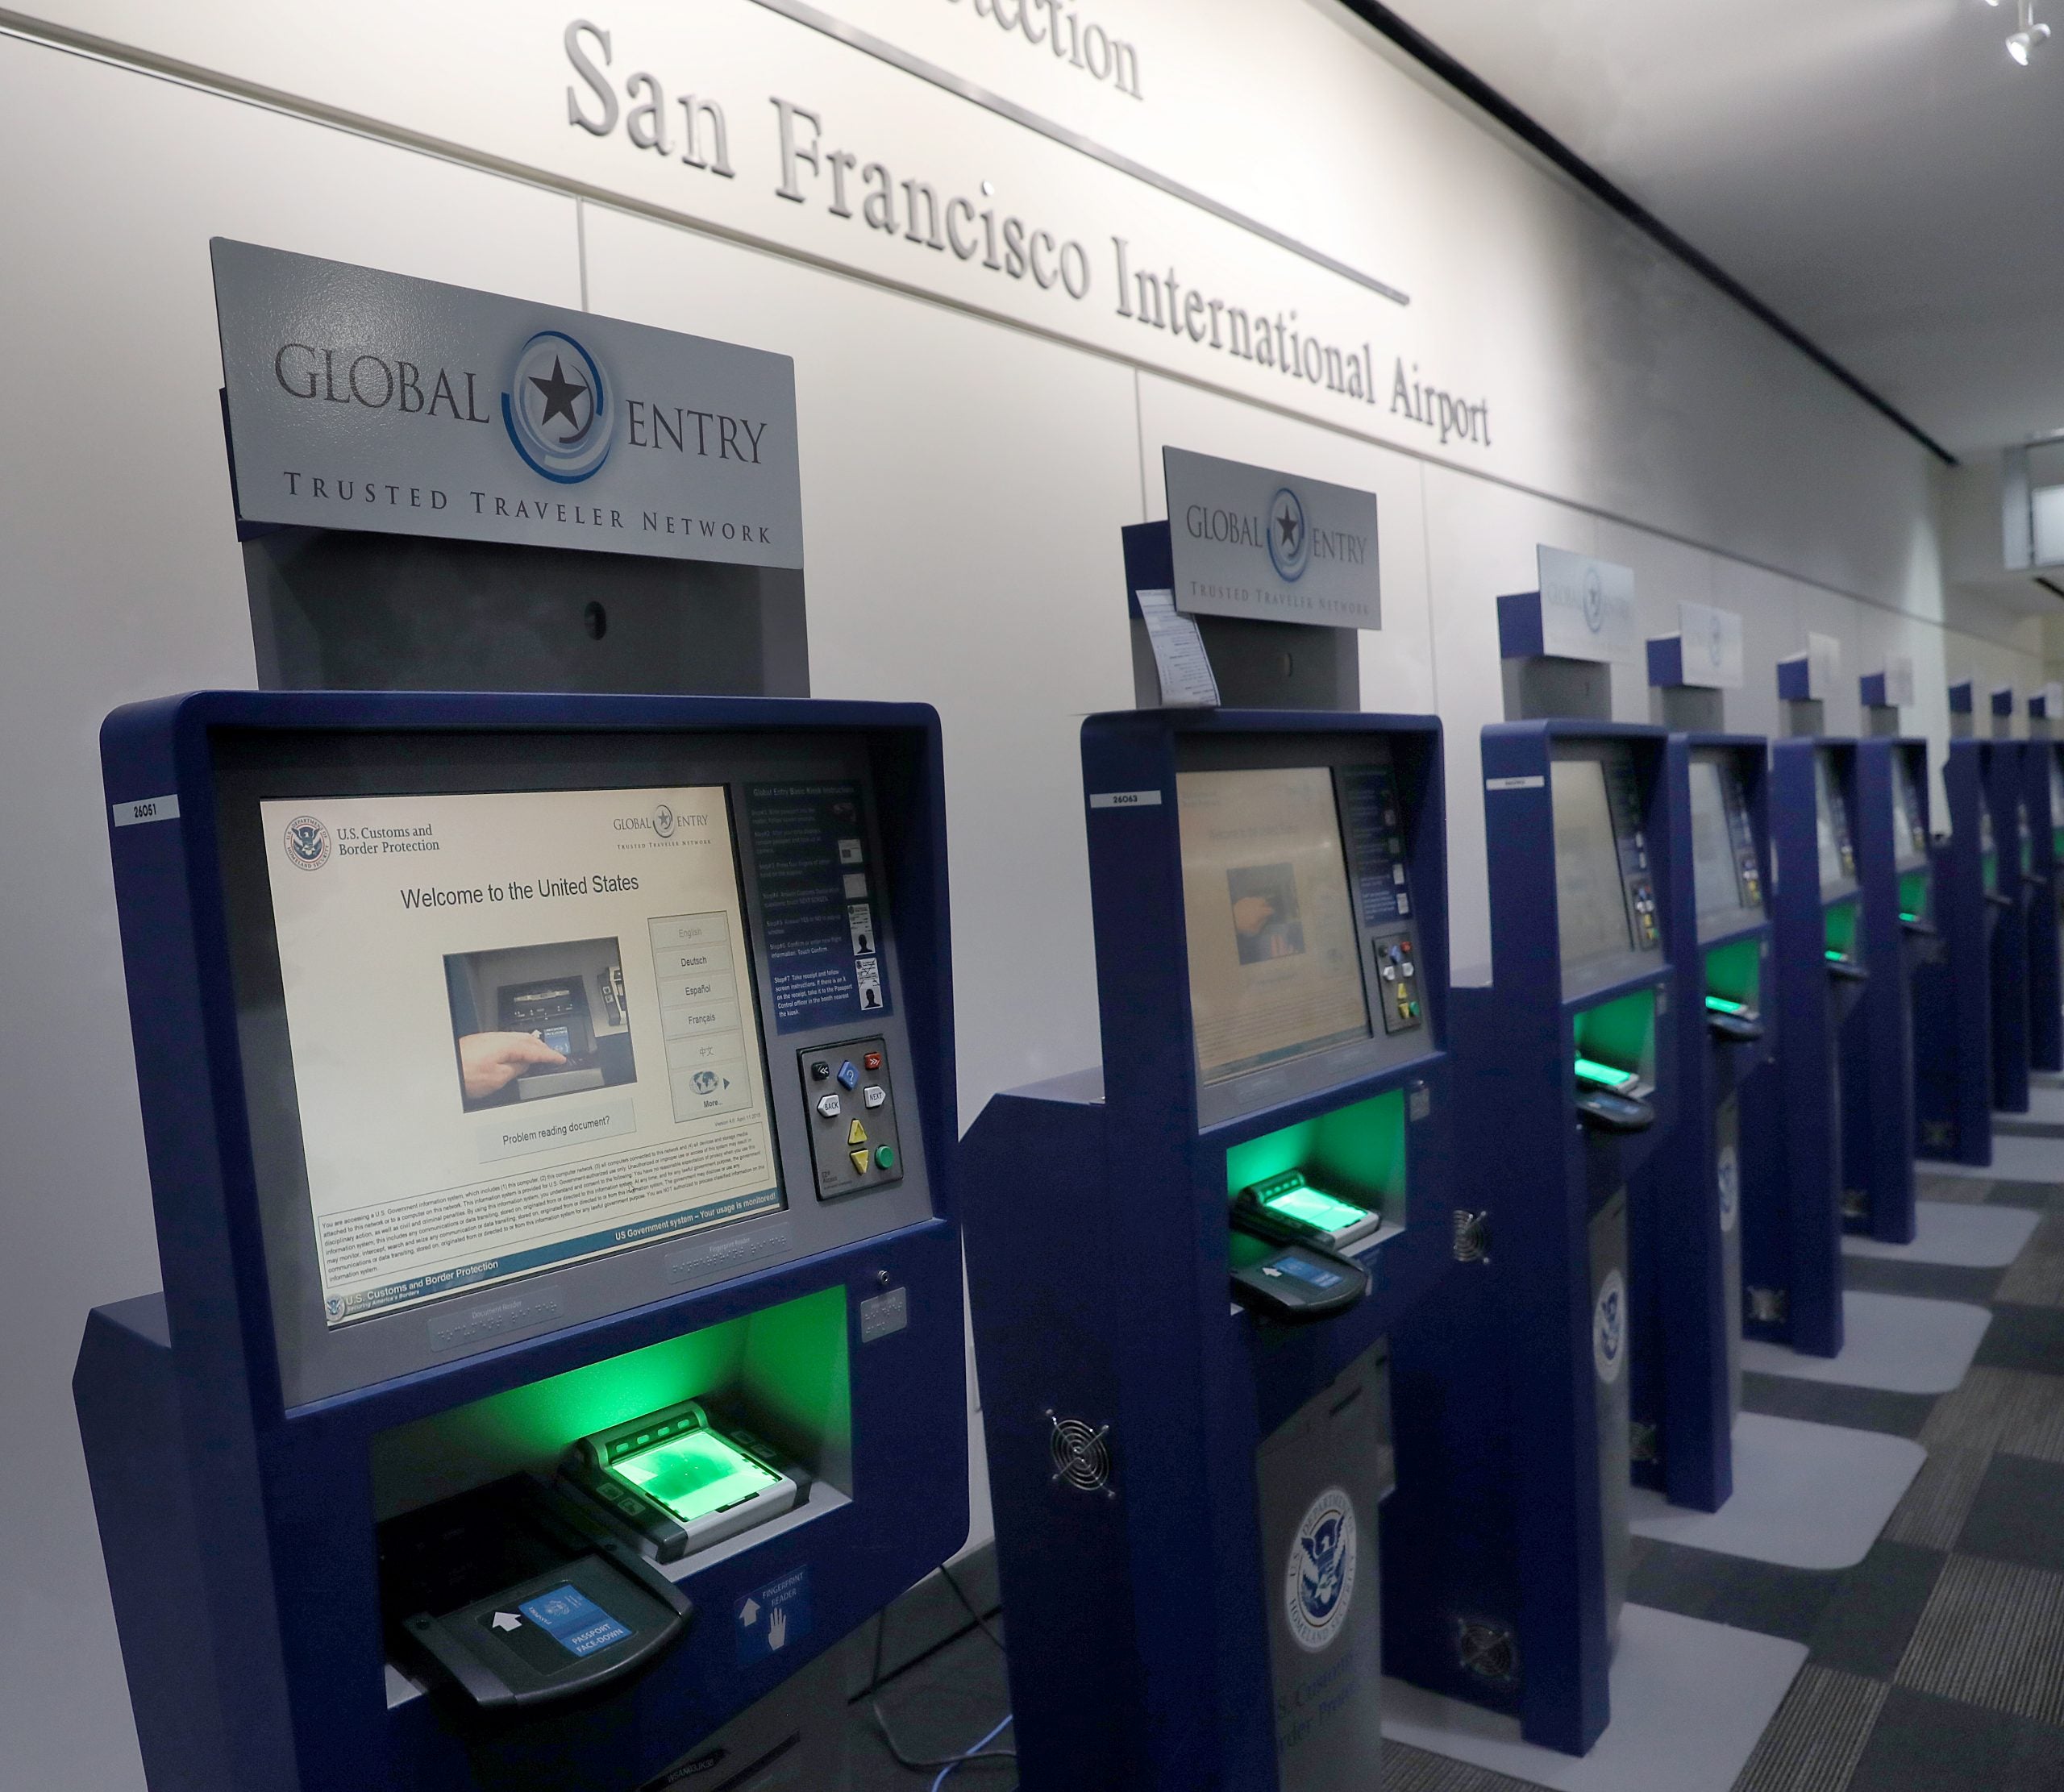 Global Entry failure: The expedited program was the slowest way through immigration